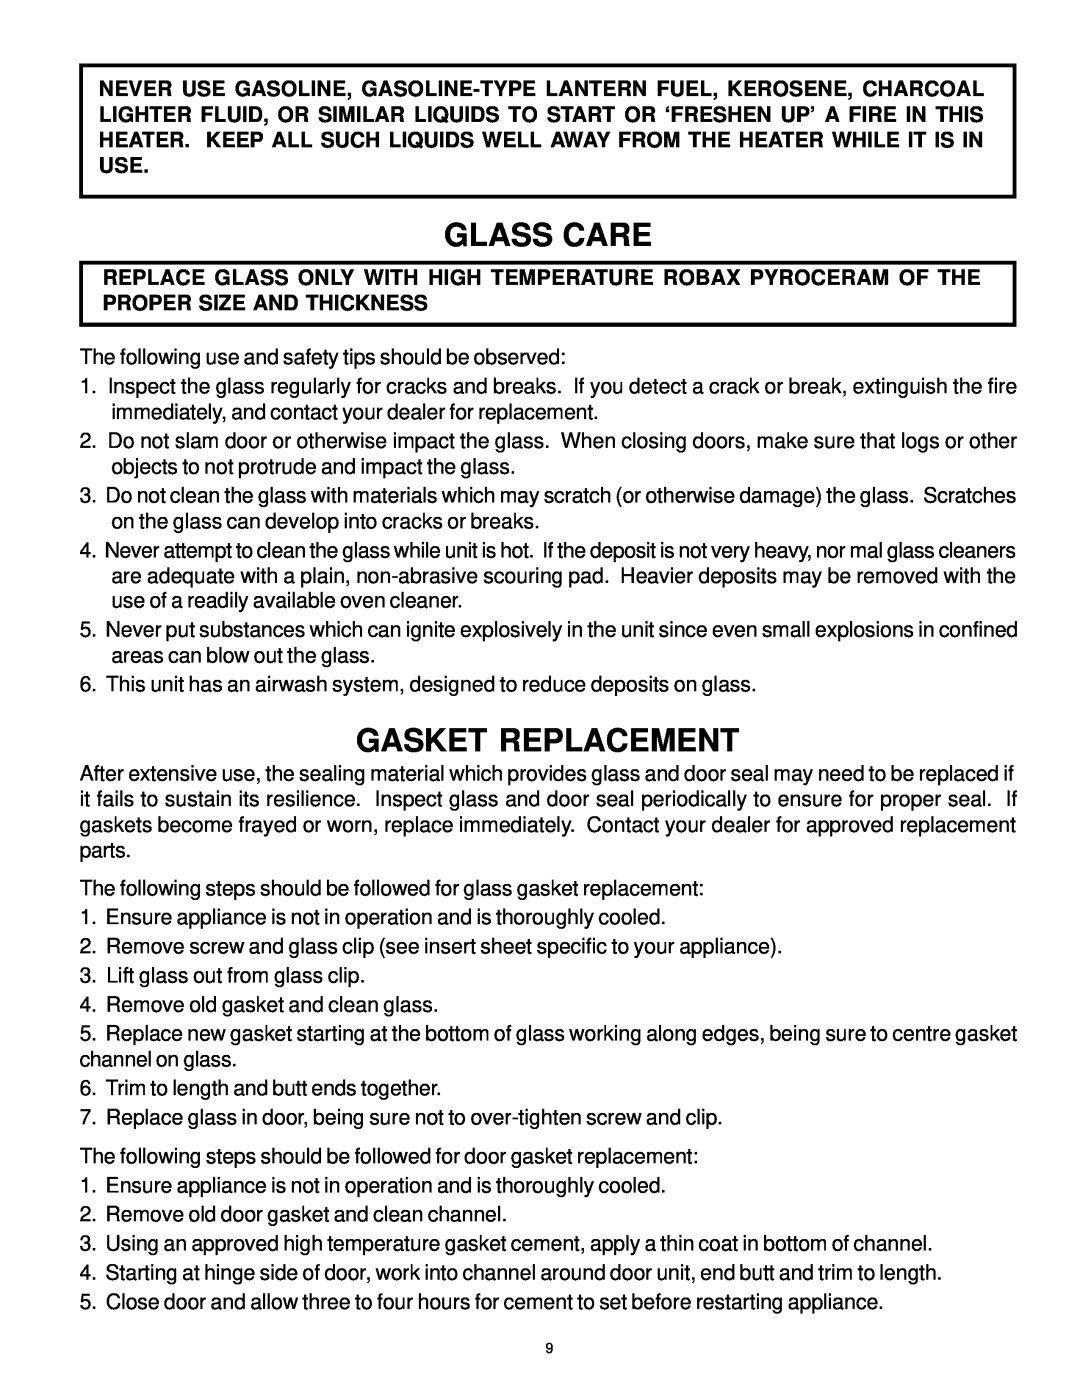 Vermont Casting AIR TIGHT WOOD STOVE owner manual Glass Care, Gasket Replacement 